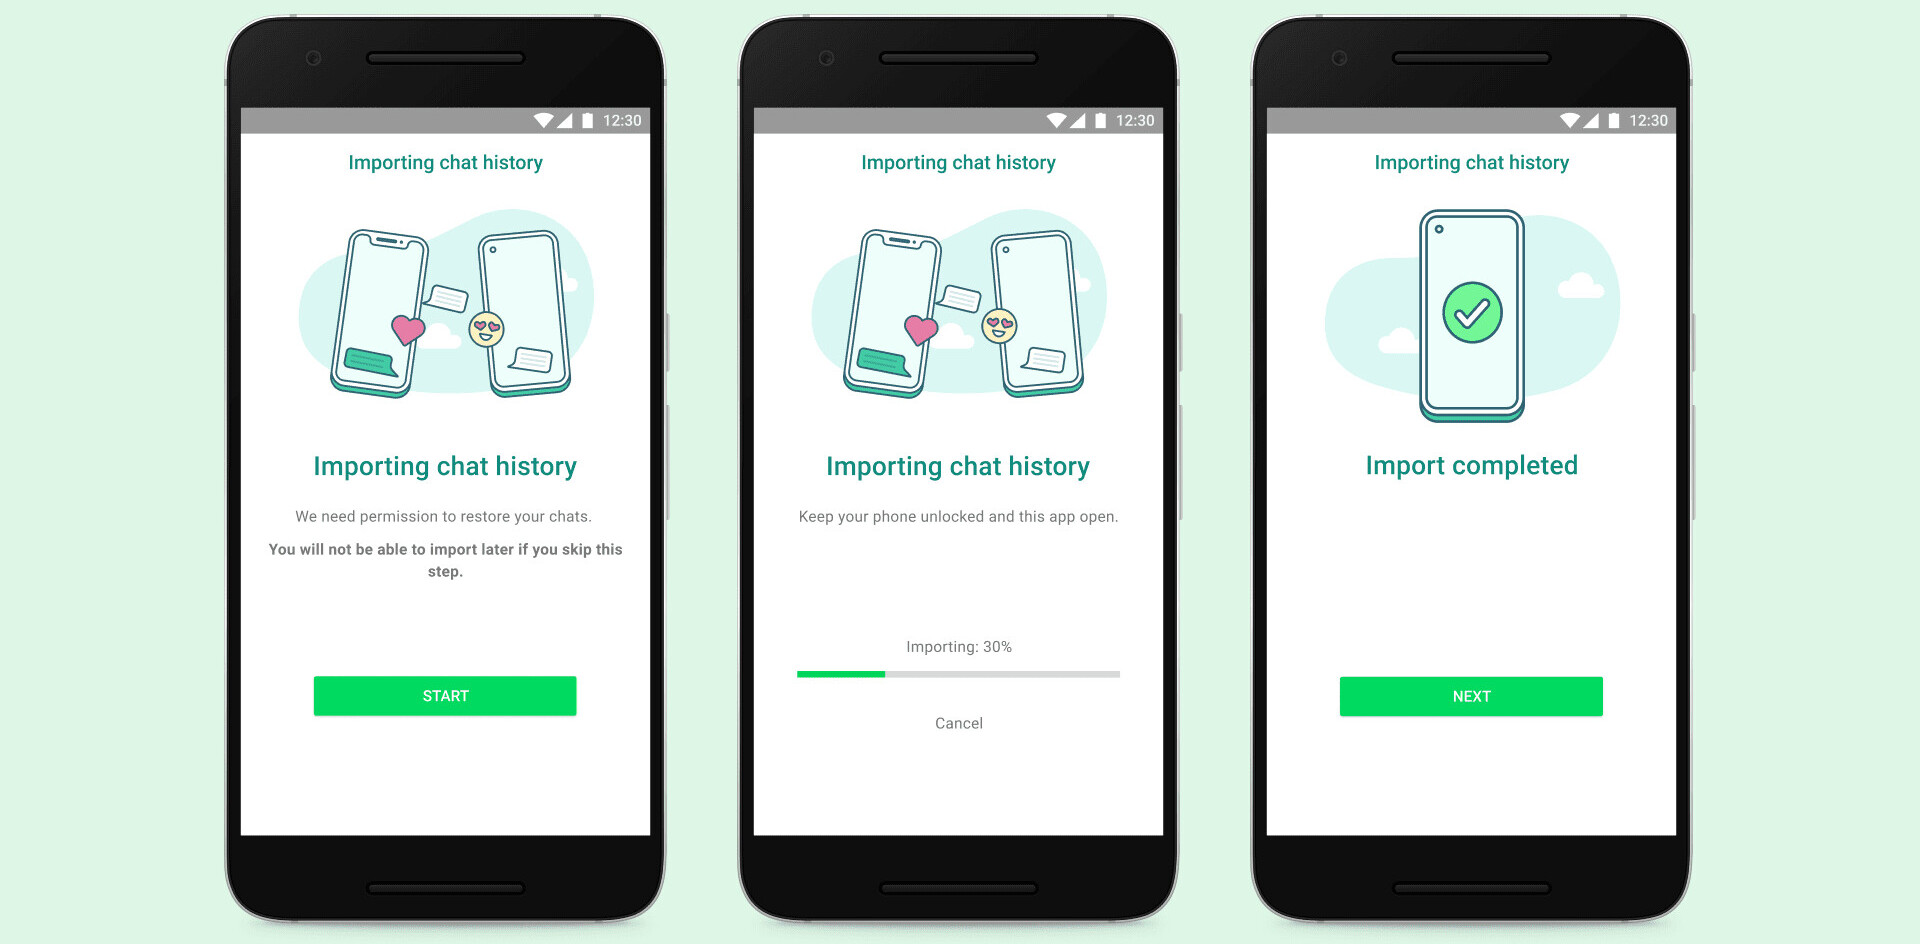 WhatsApp just made it easy to switch between iOS and Android